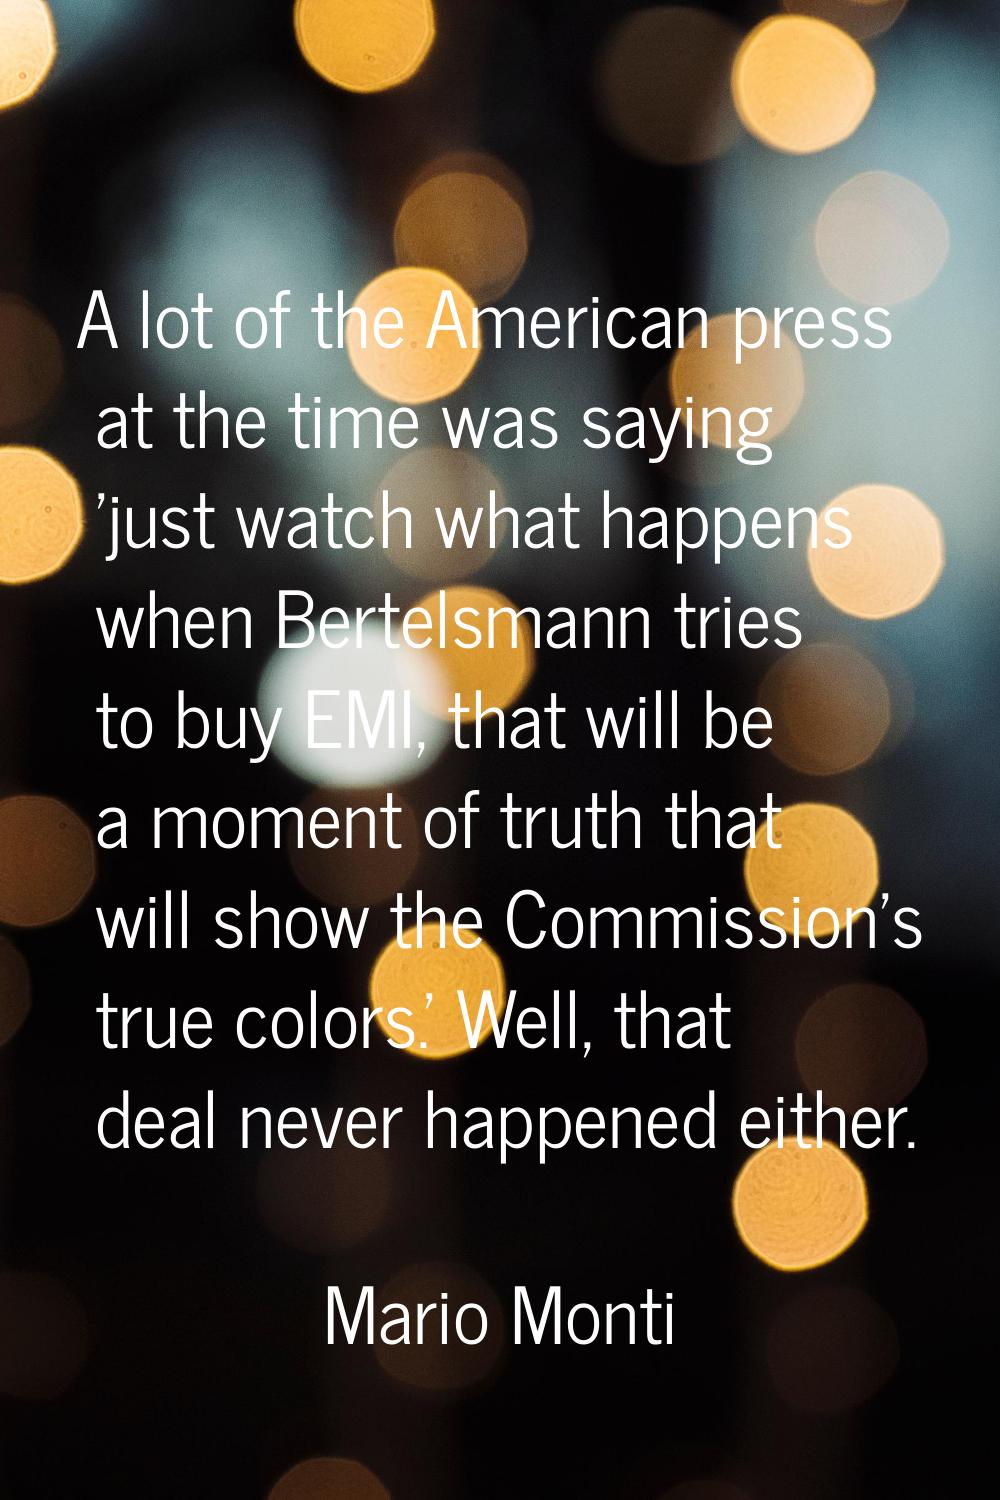 A lot of the American press at the time was saying 'just watch what happens when Bertelsmann tries 